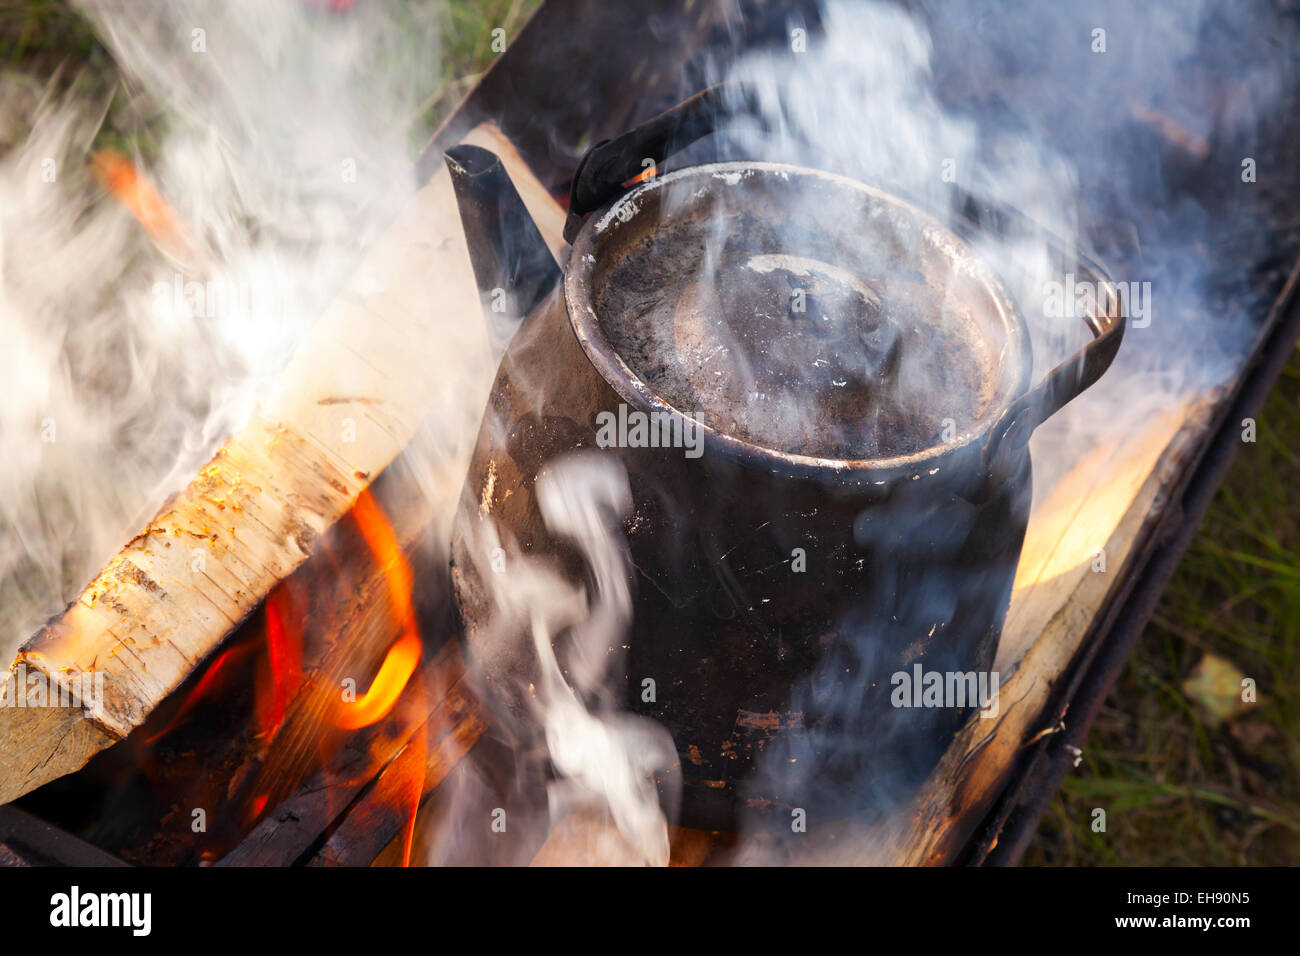 Bonfire with smoke over metal old black boiling teapot Stock Photo